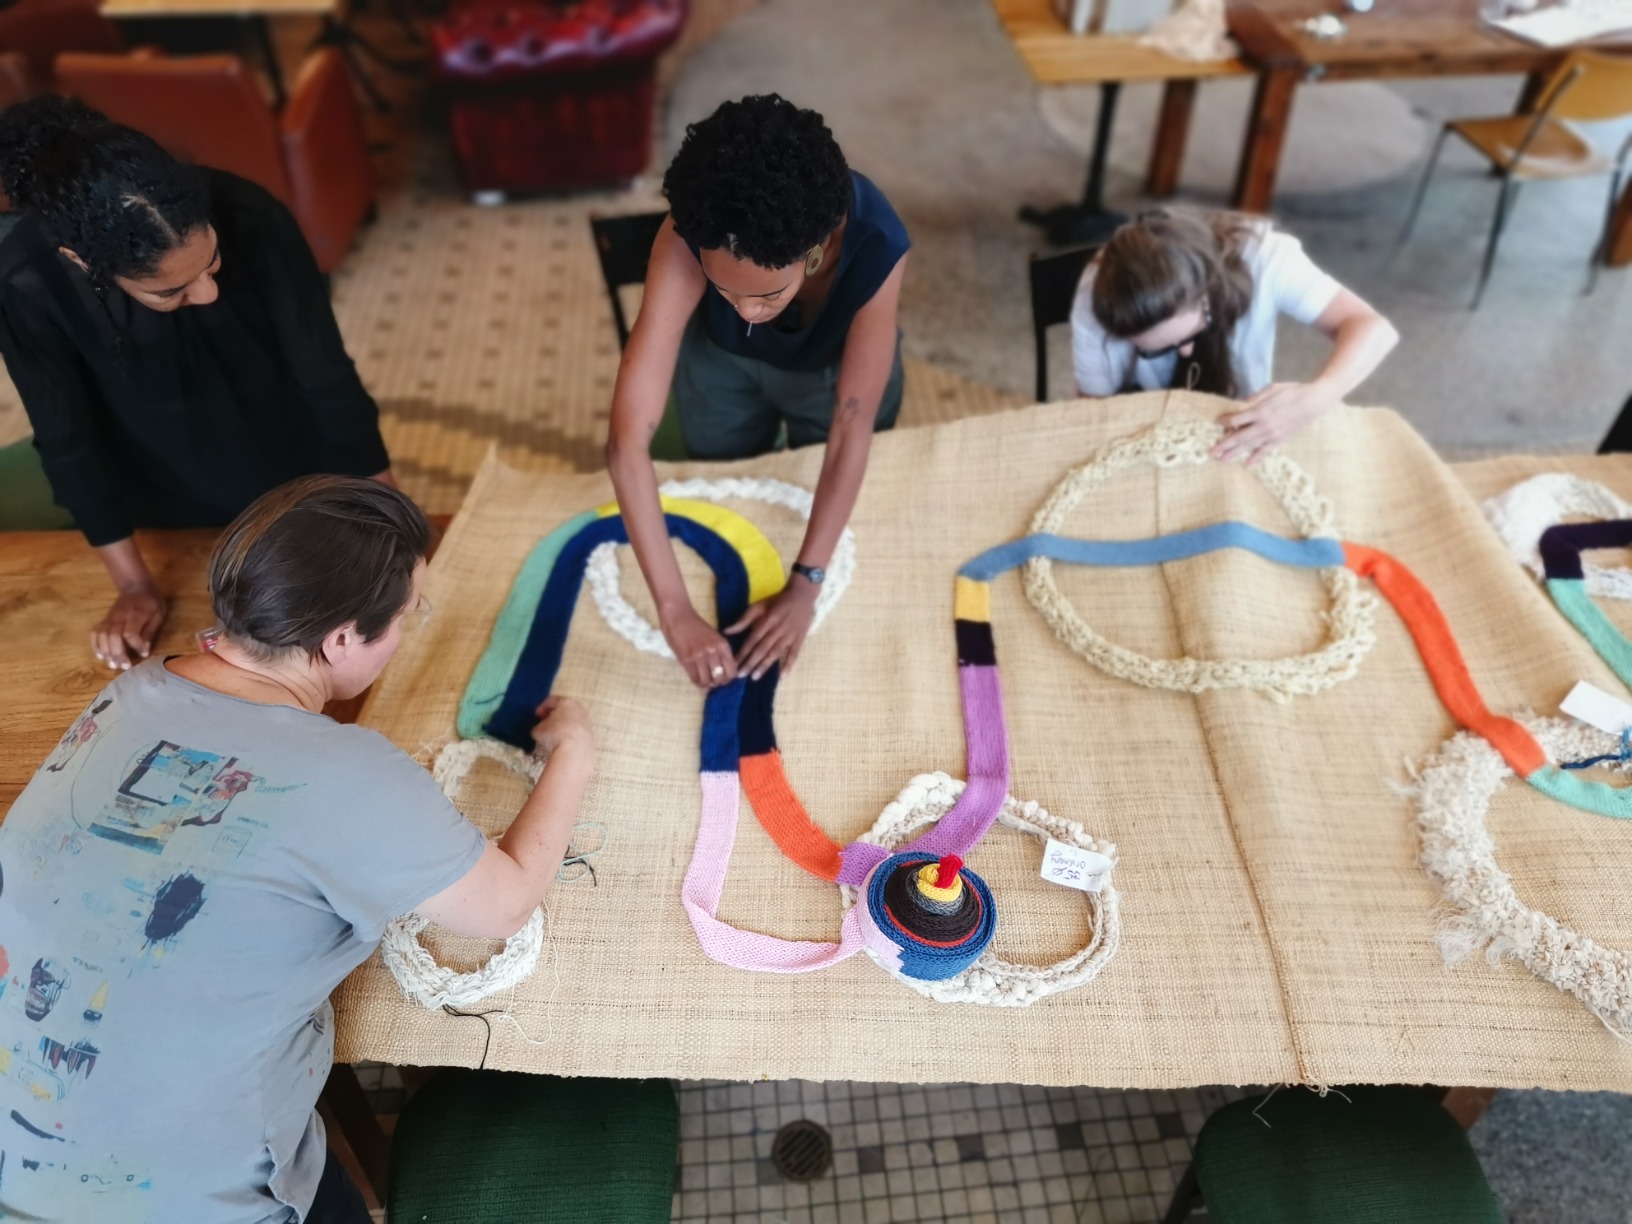 Photo of Matri-Archi team members and collaborators sewing items onto the tapestry. The tapestry is a rafia-base with colourful woolen swirls interrupted by rings of various textile materials.